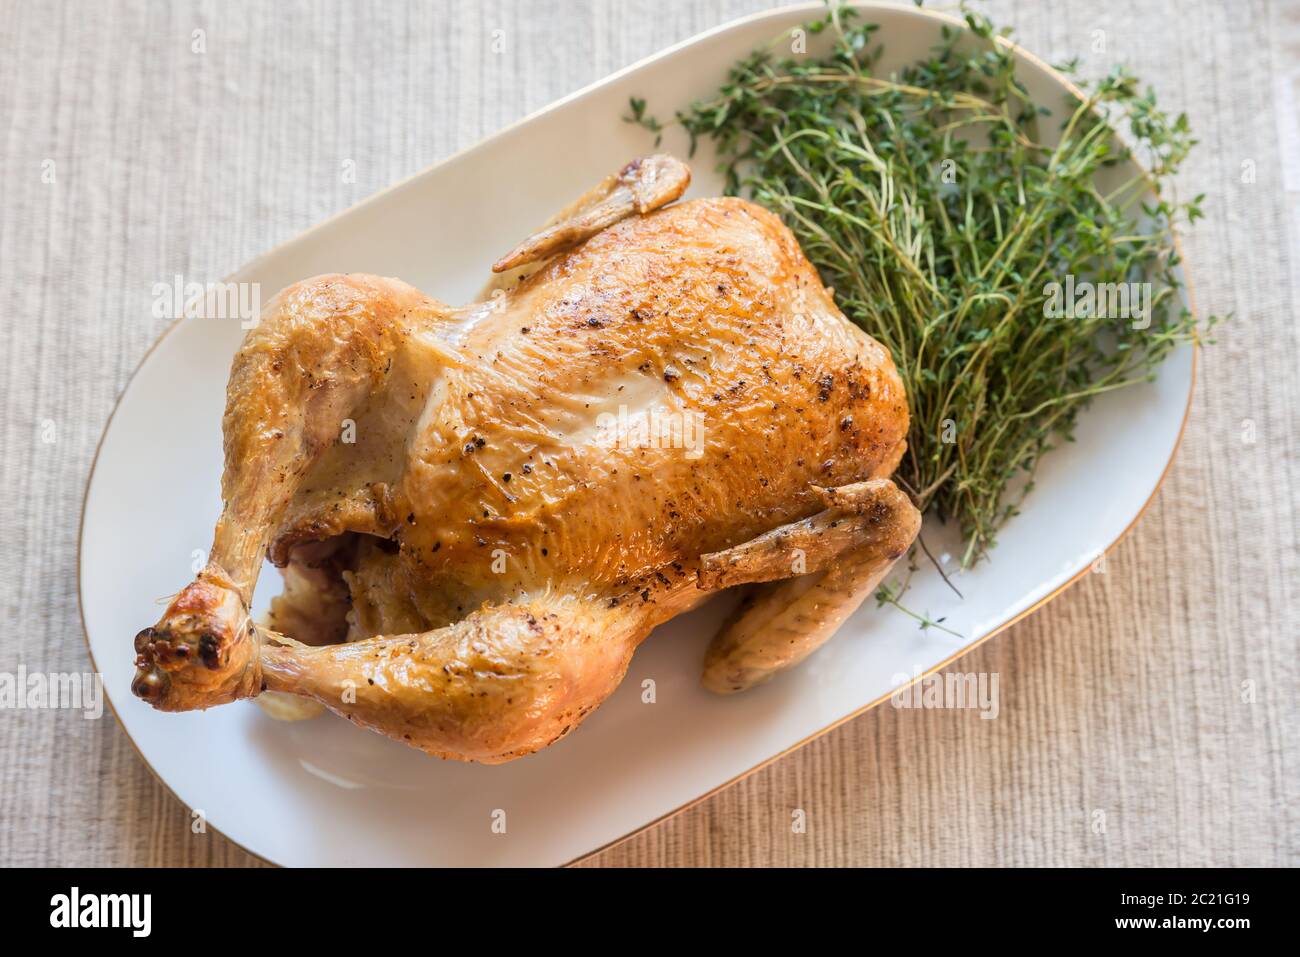 Roasted chicken with fresh thyme Stock Photo